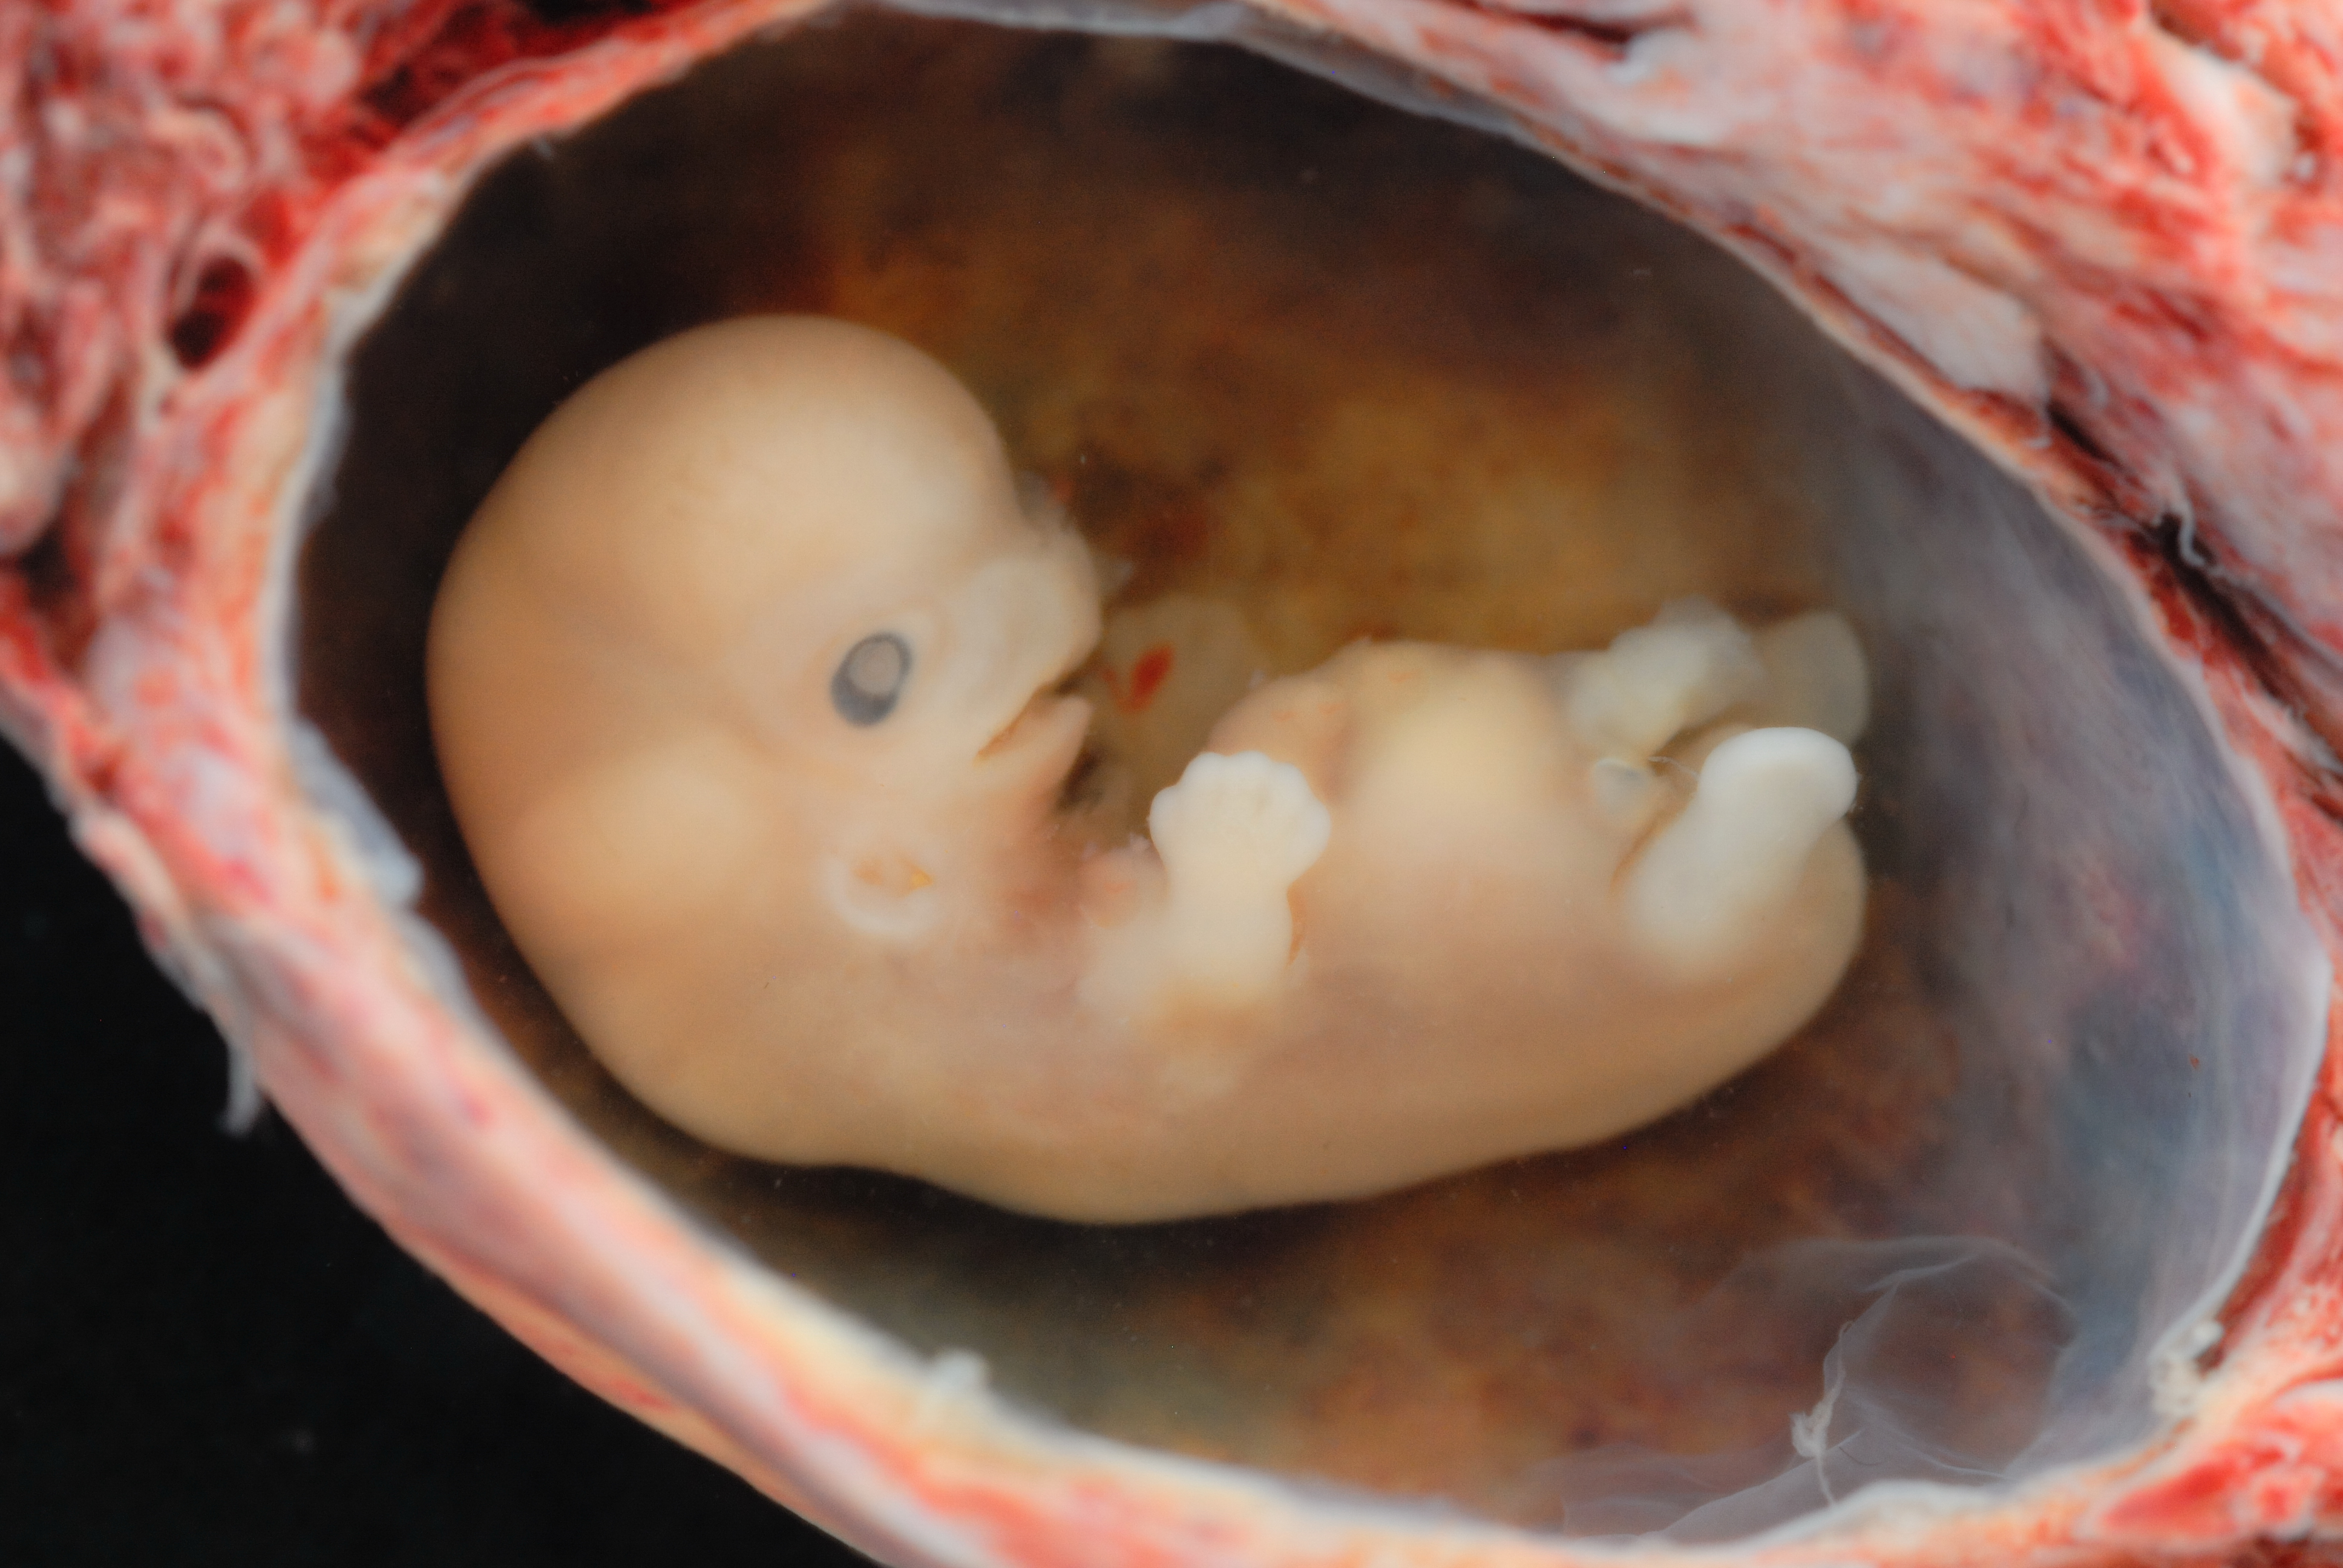 A tiny embryo depicting some development of arms and legs, as well as facial features that are starting to show.^[[Image](https://www.flickr.com/photos/28004184@N00/3233482244/) by [lunar caustic](https://www.flickr.com/photos/lunarcaustic/) is licensed under [CC BY 2.0](https://creativecommons.org/licenses/by/2.0/)]